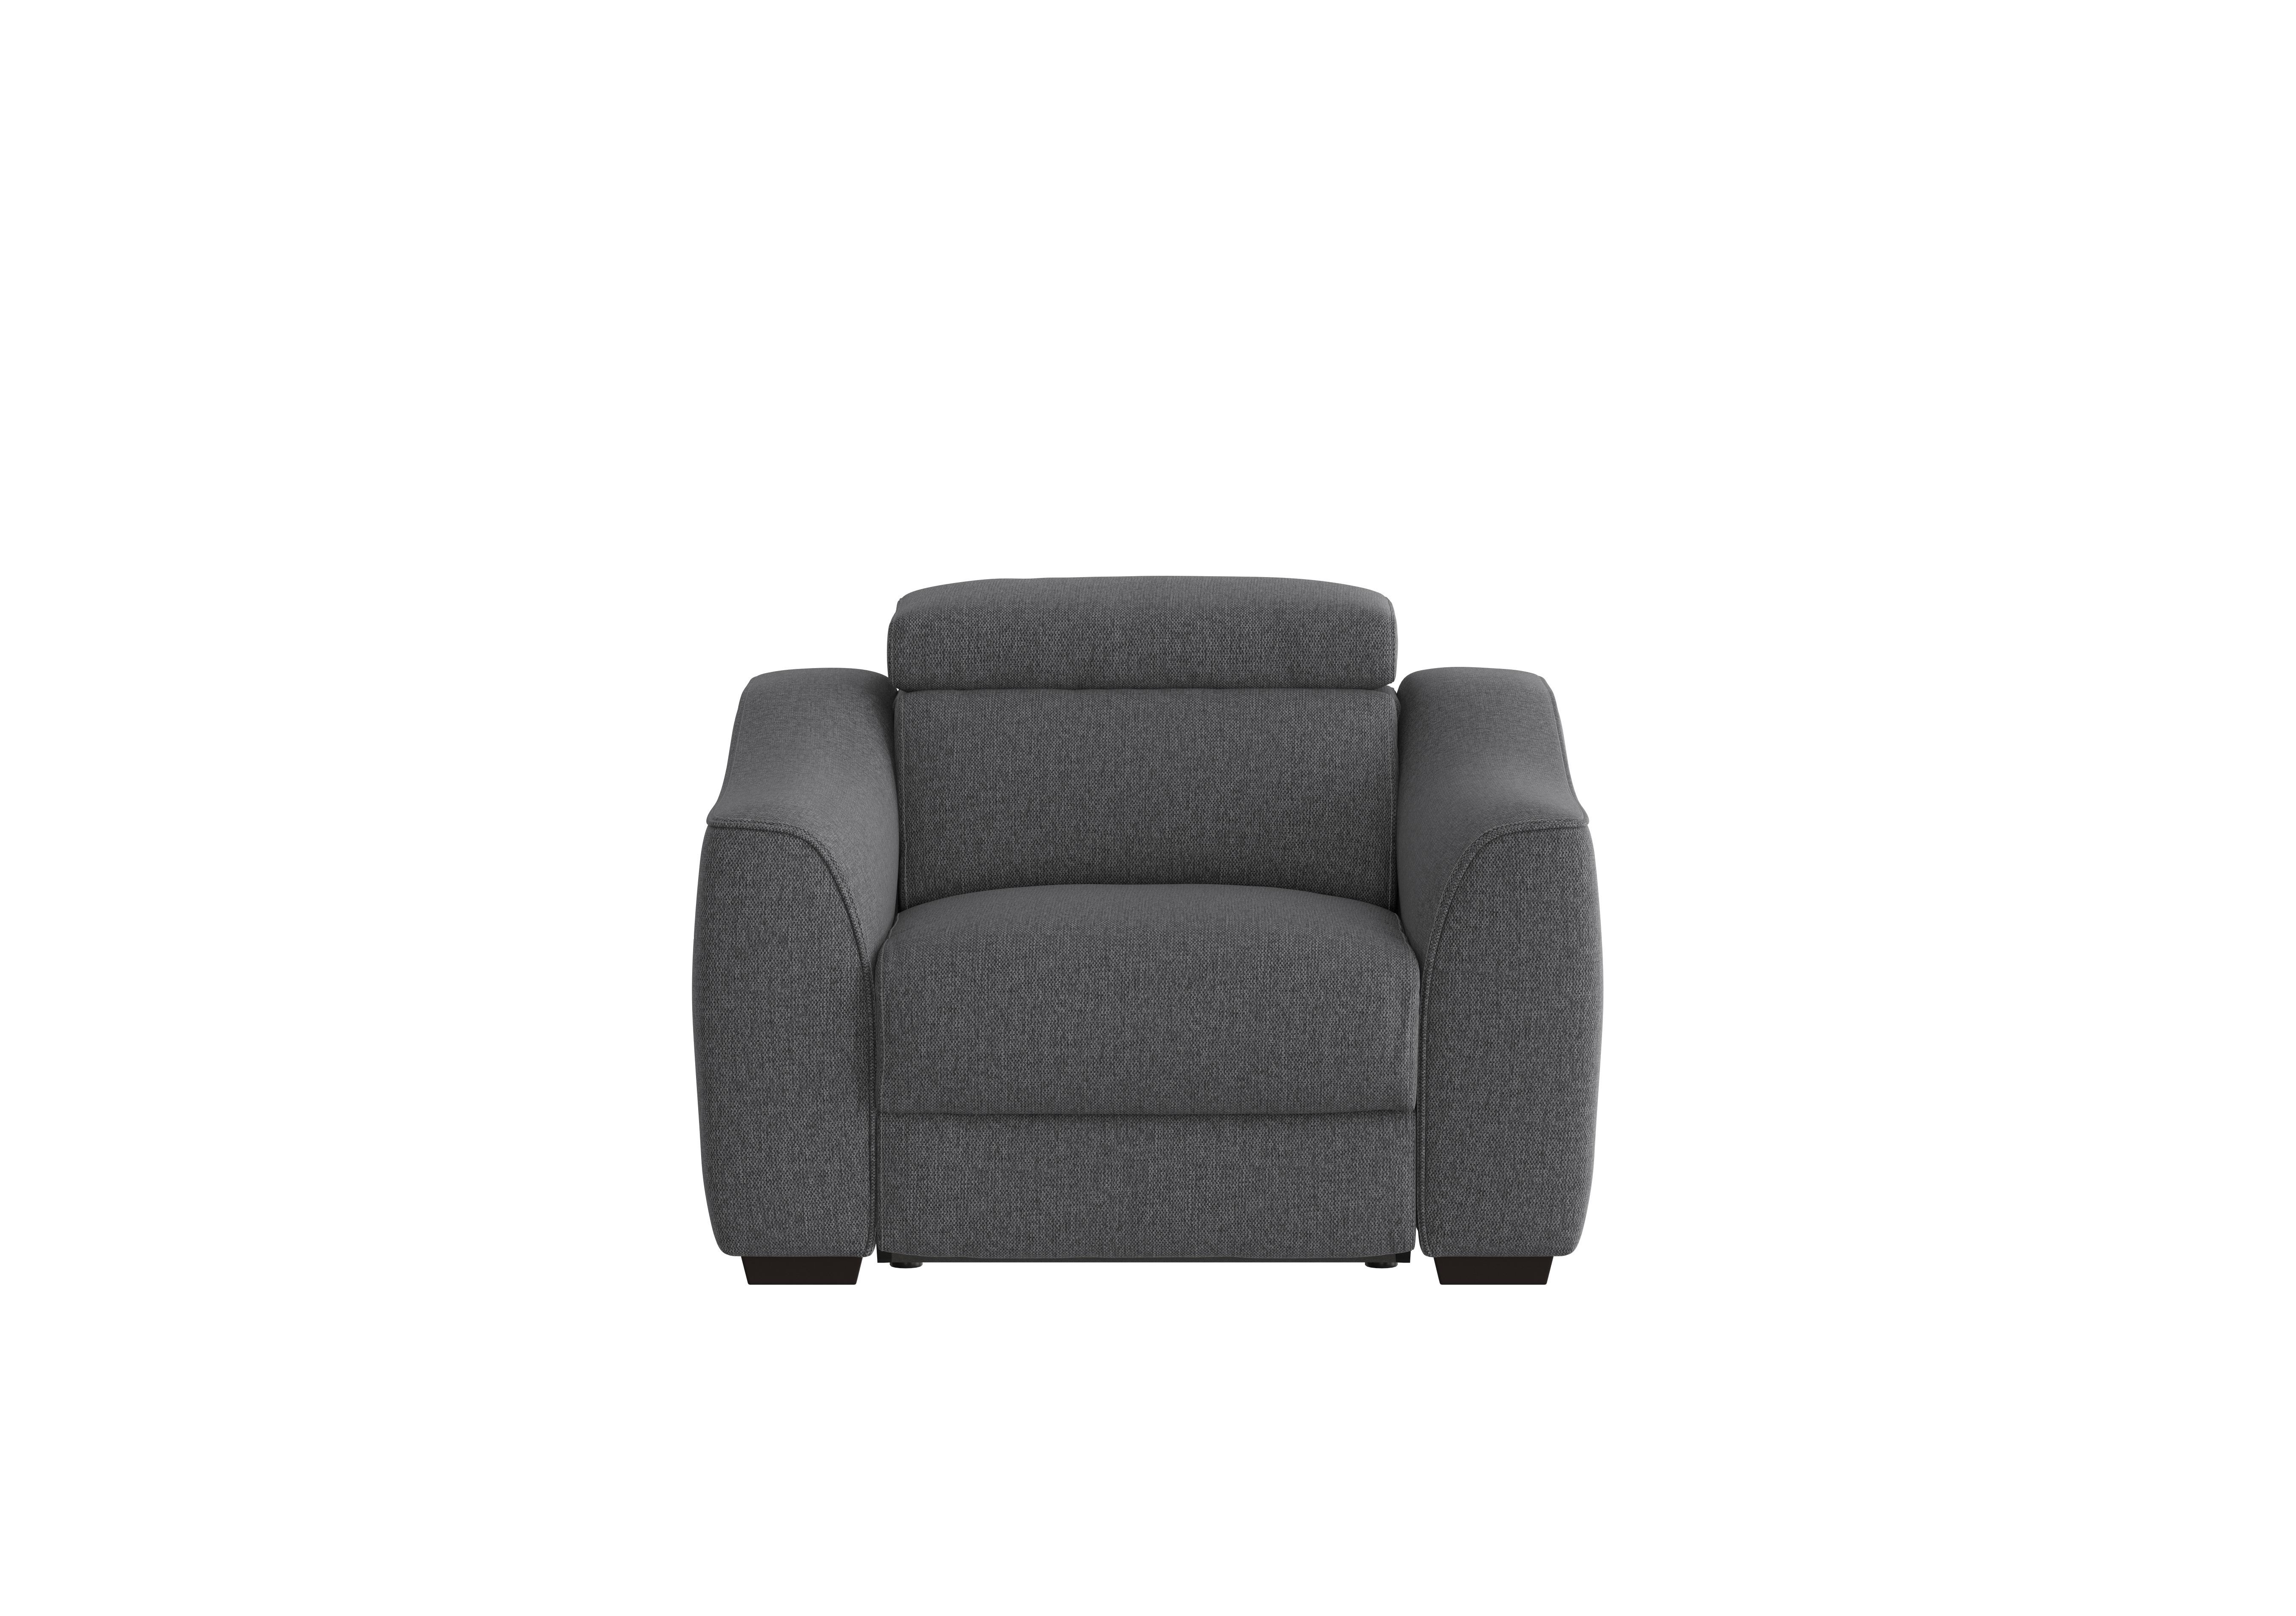 Elixir Fabric Armchair in Fab-Blt-R39 Charcoal on Furniture Village